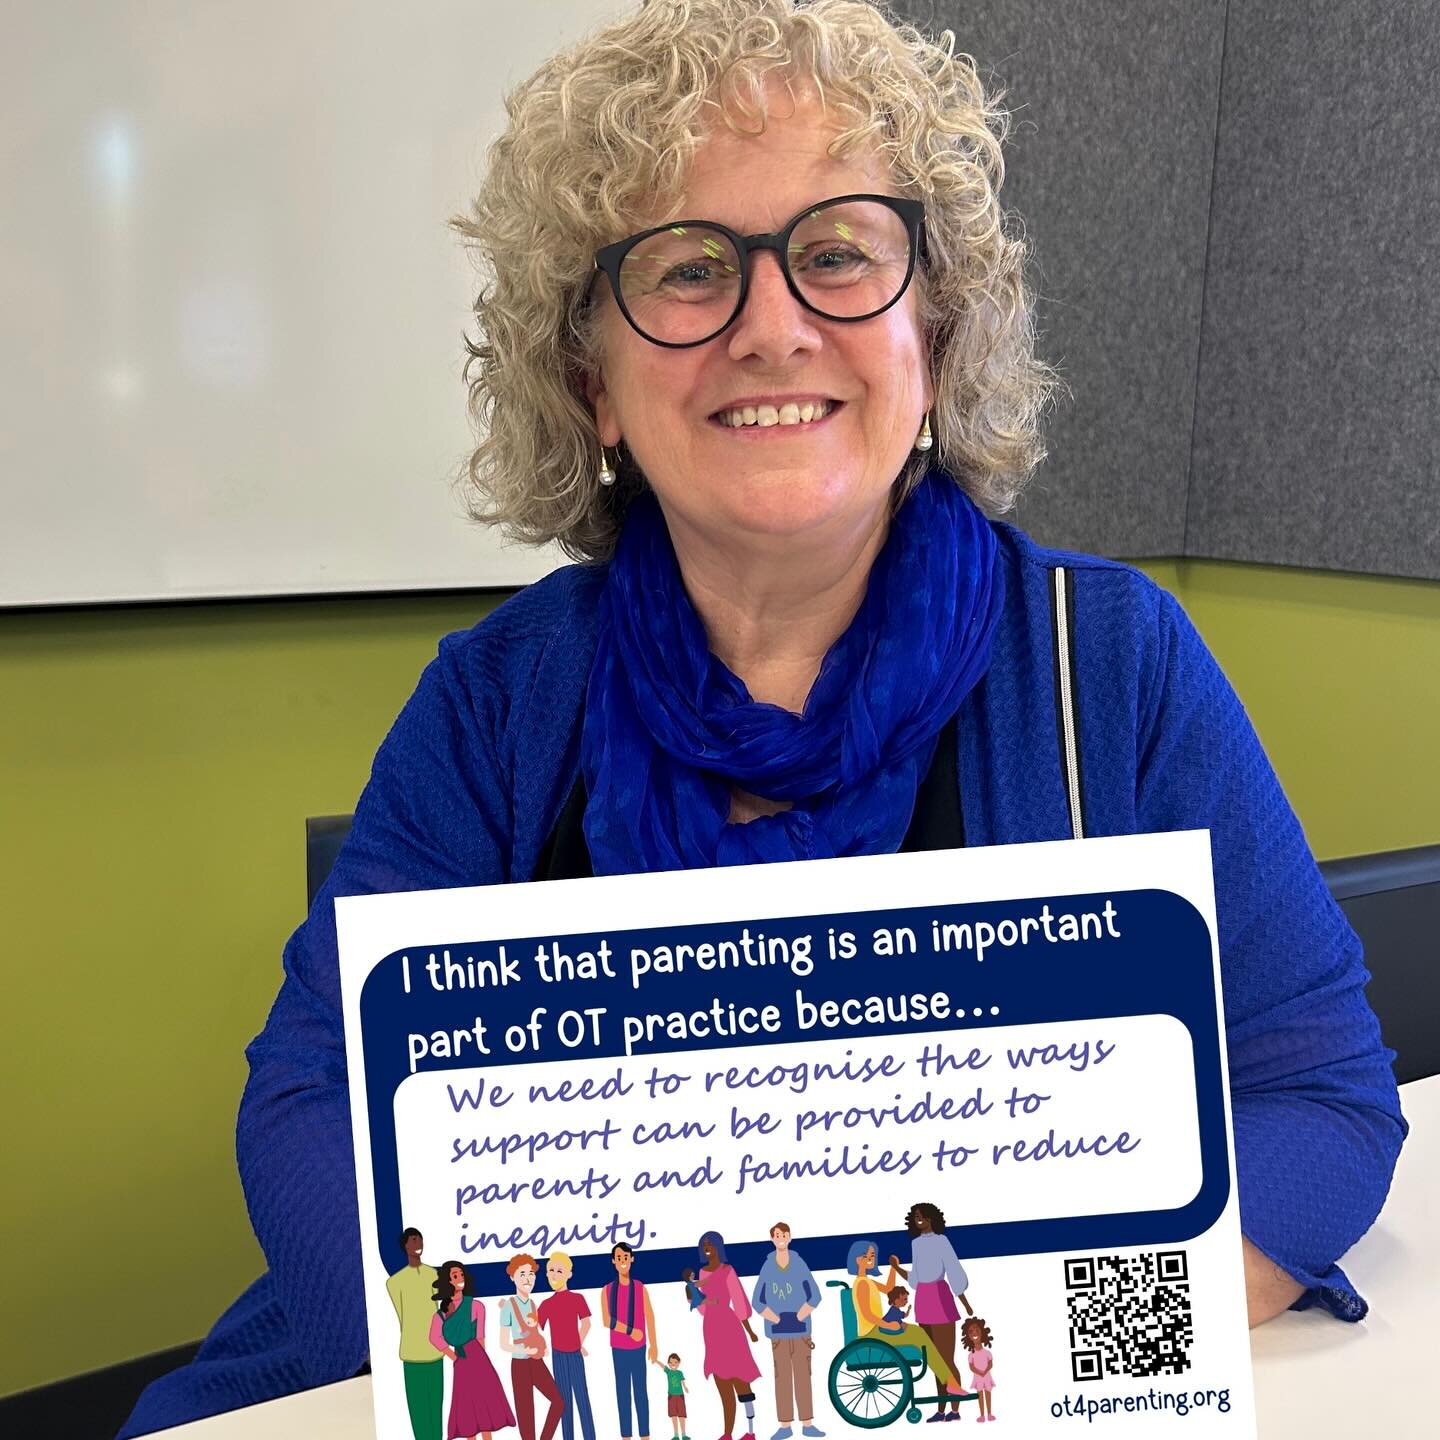 Kim Bulkeley is an OT and she thinks that parenting is an important part of OT practice because... &ldquo;We need to recognise the ways support can be provided to parents to reduce inequity!&rdquo;

Thank you Kim! 

To participate in the survey inves